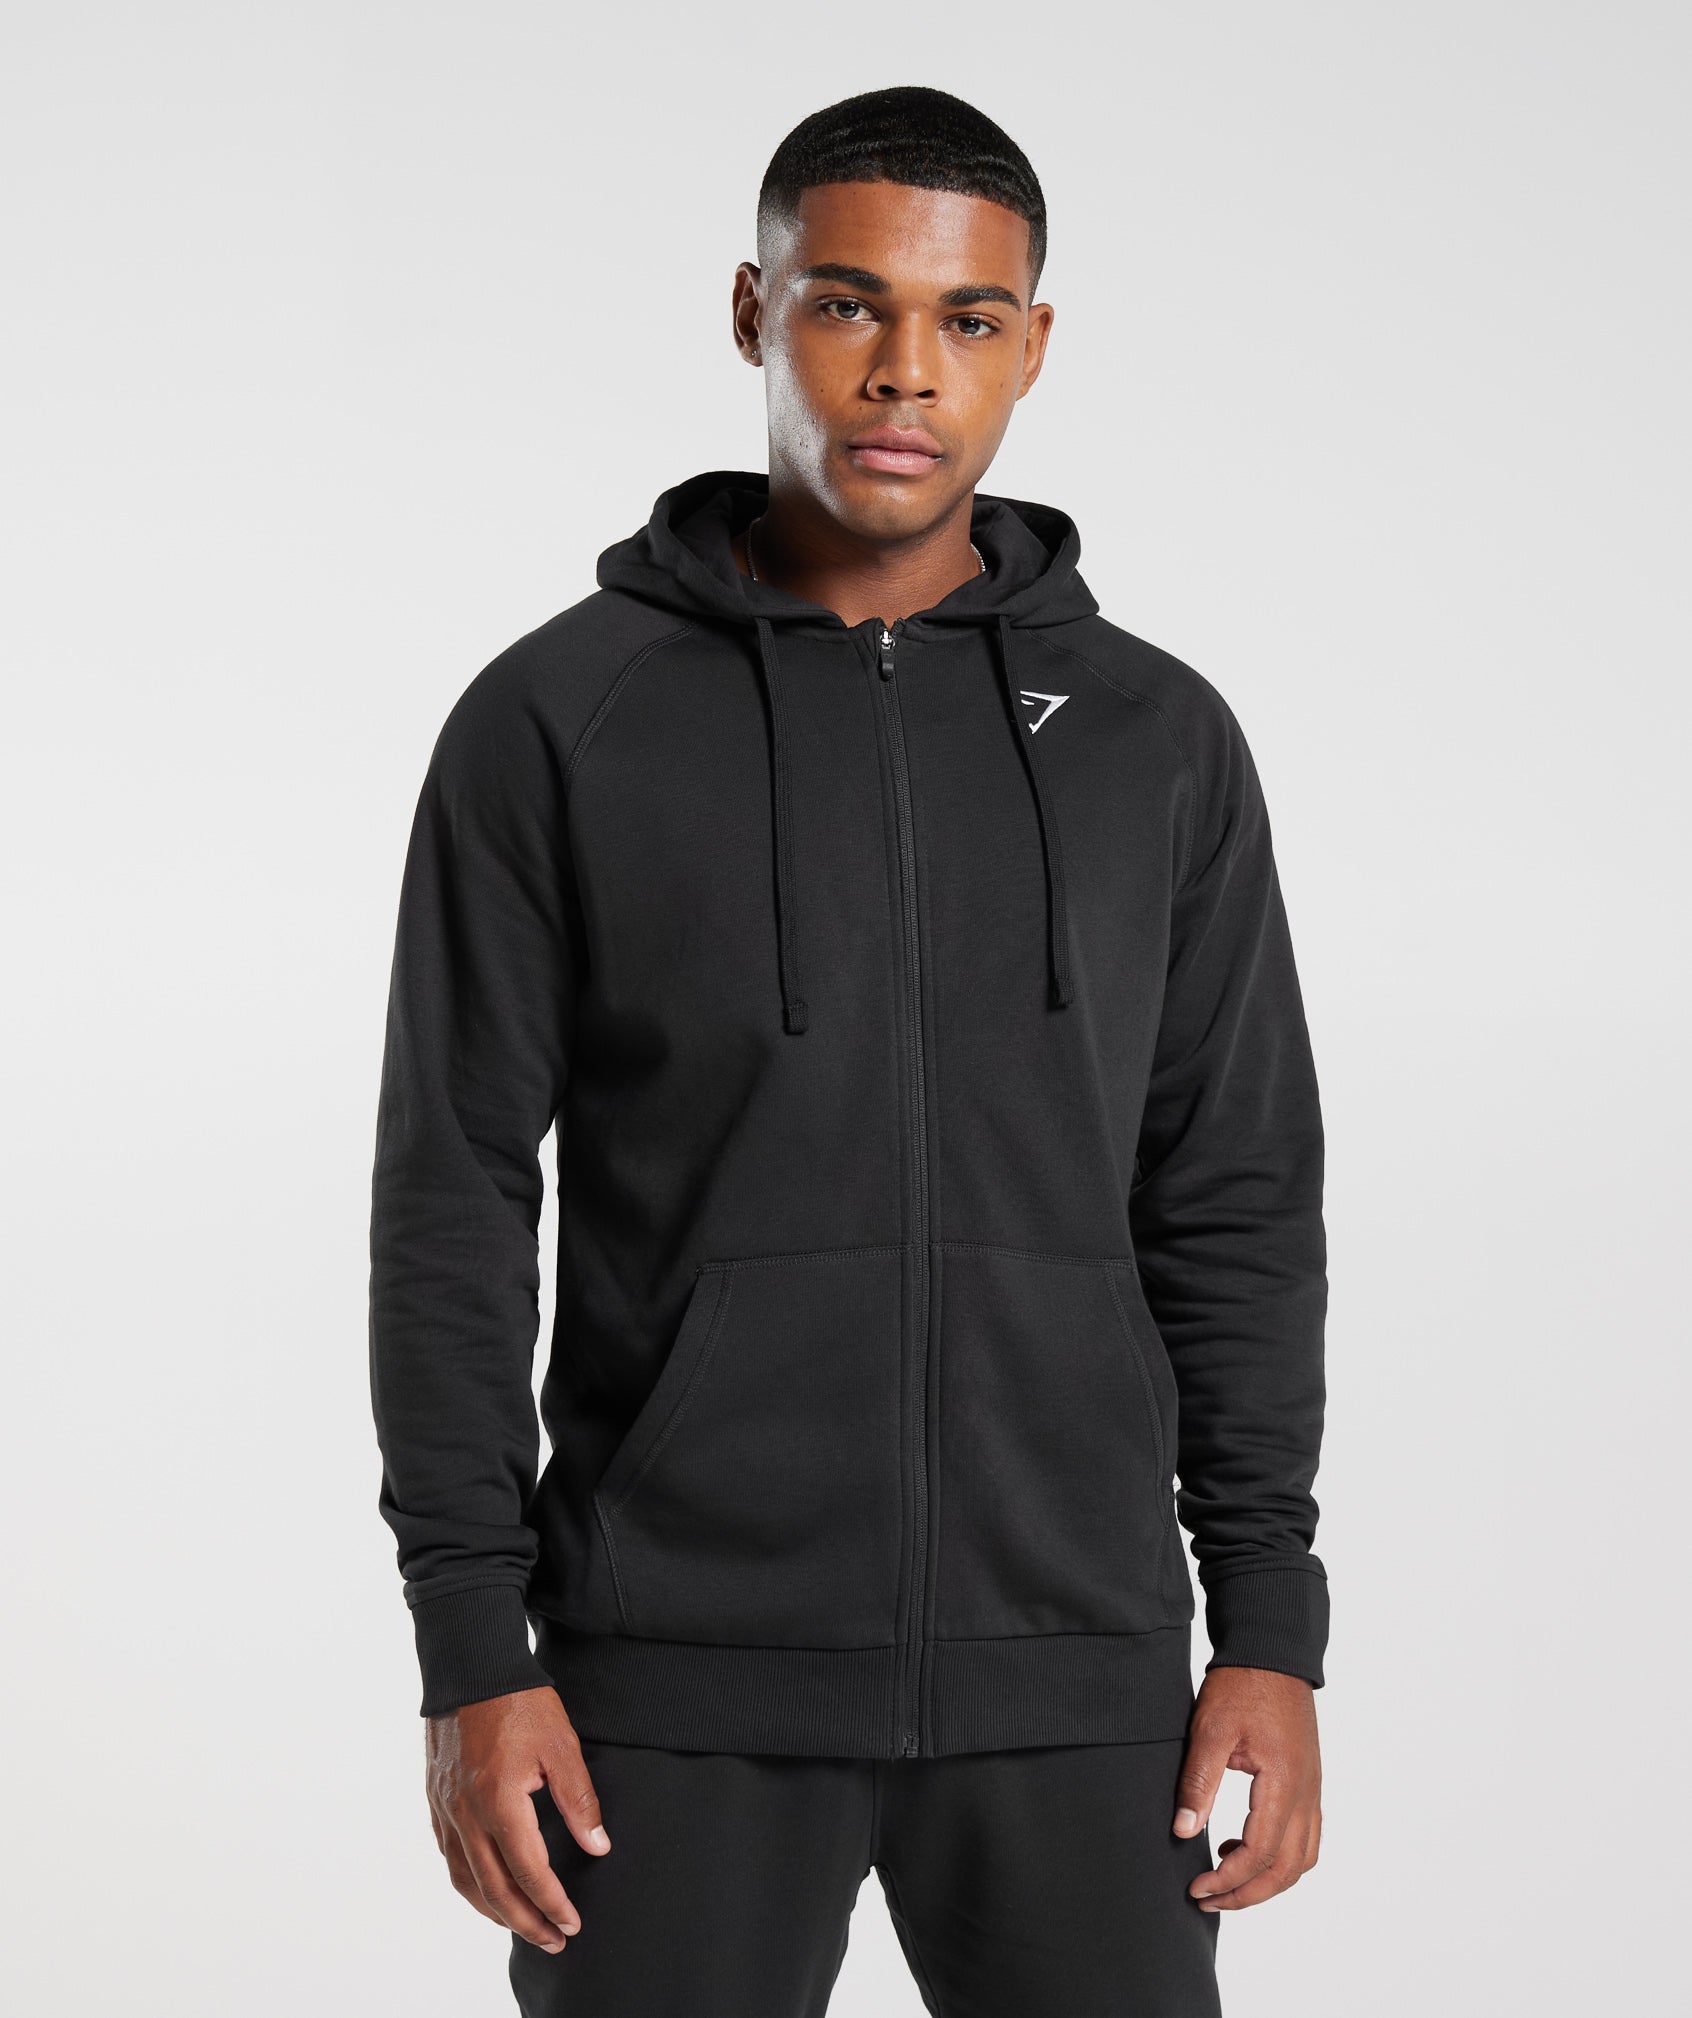 Crest Zip Up Hoodie in {{variantColor} is out of stock